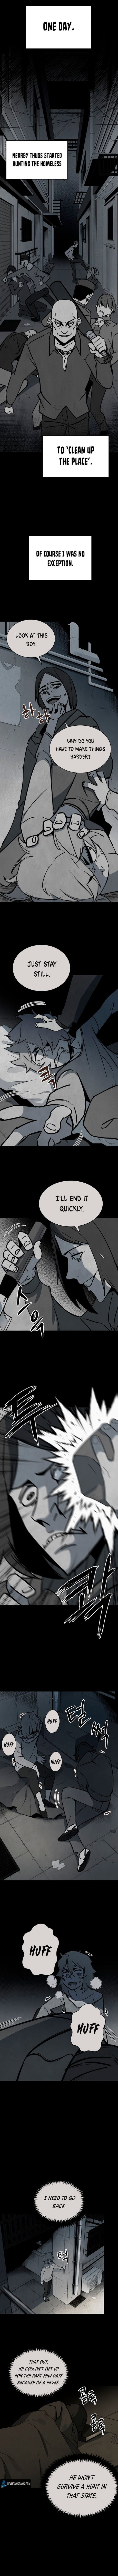 The Descent of the Demonic Master Chapter 31 - Page 4